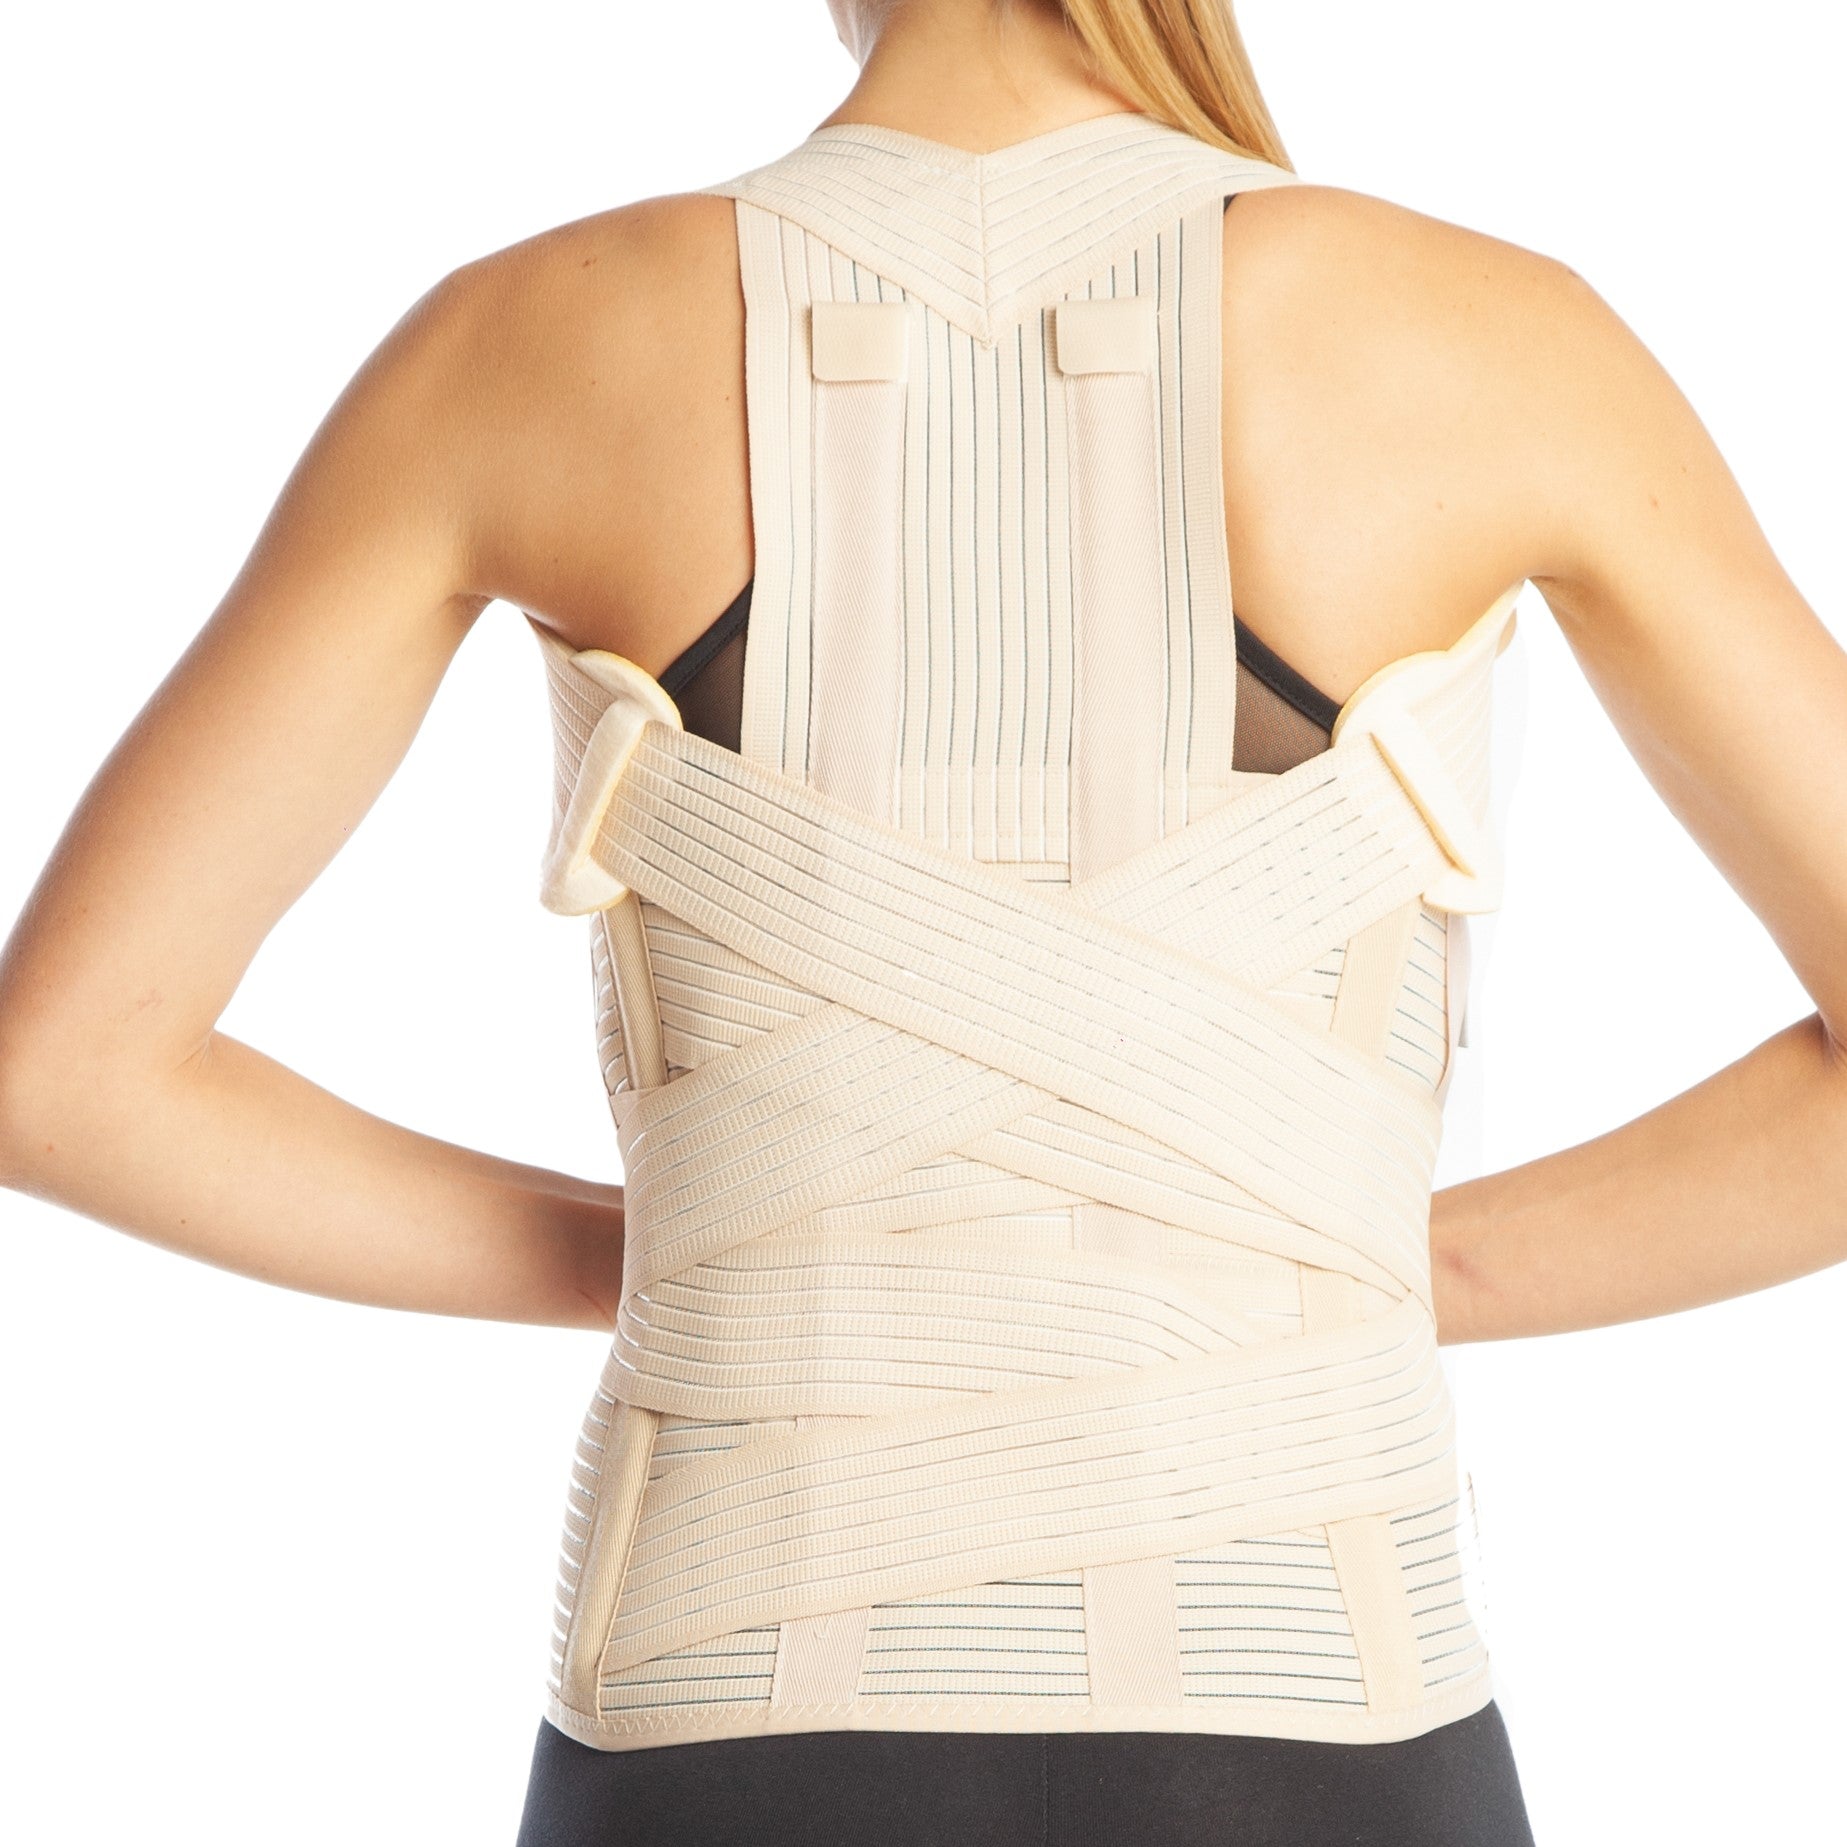 Buy Dorsolumbar Braces for Lower, Middle and Upper Back Support